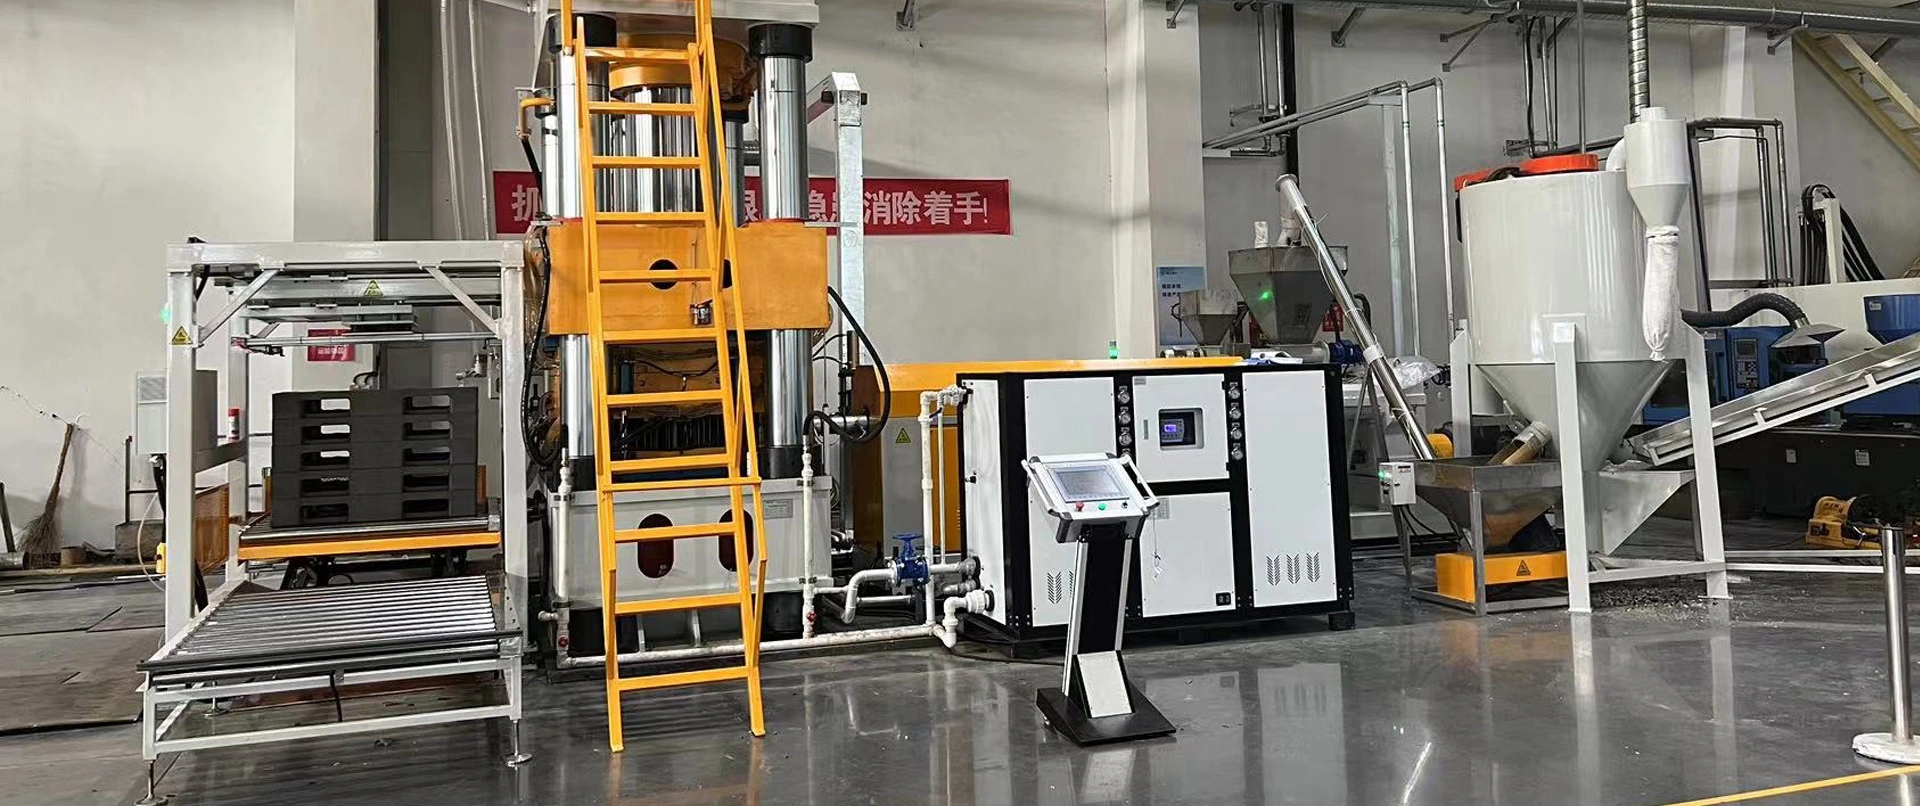 Waste PCB Recycling Machine